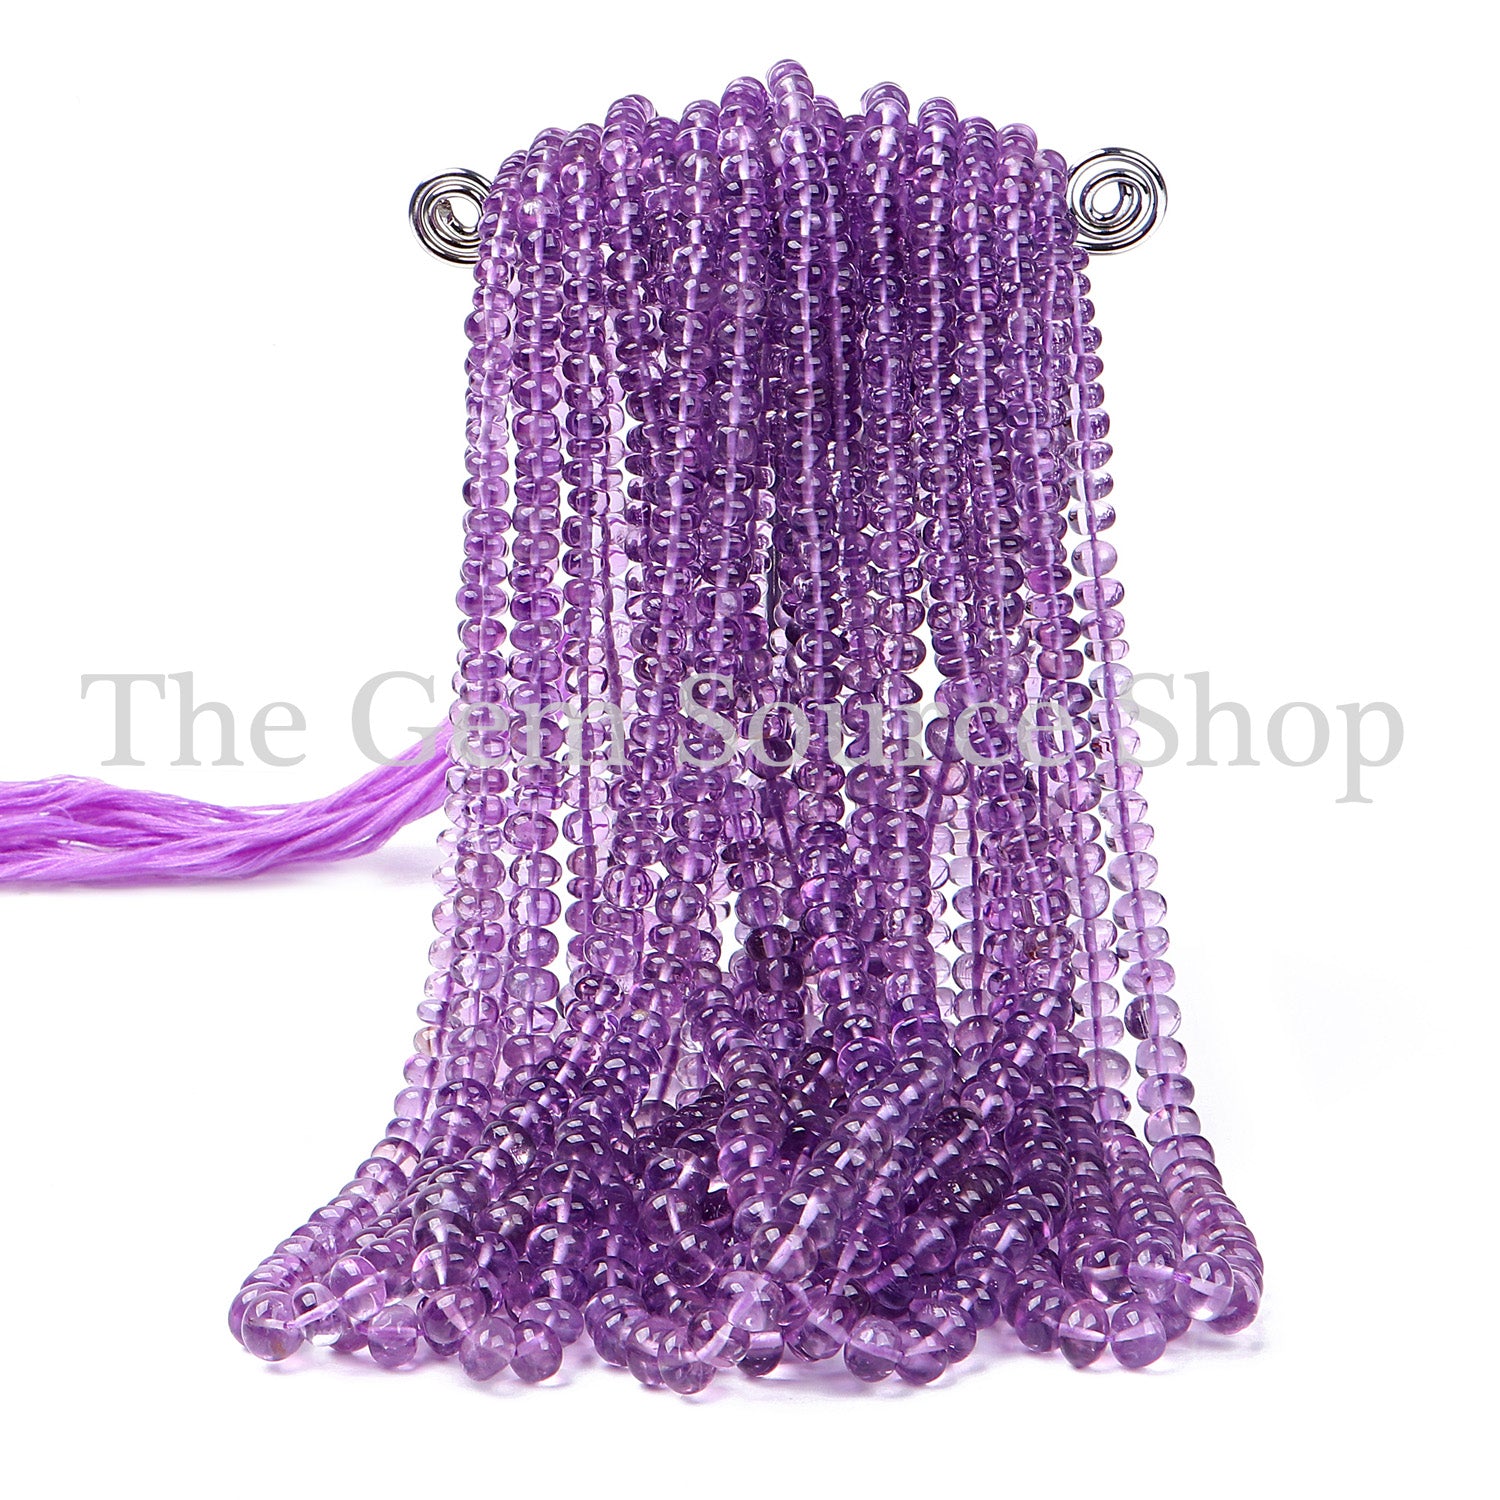 Pink Amethyst Beads, Amethyst Smooth Beads, Amethyst Rondelle Shape Beads, Wholesale Beads